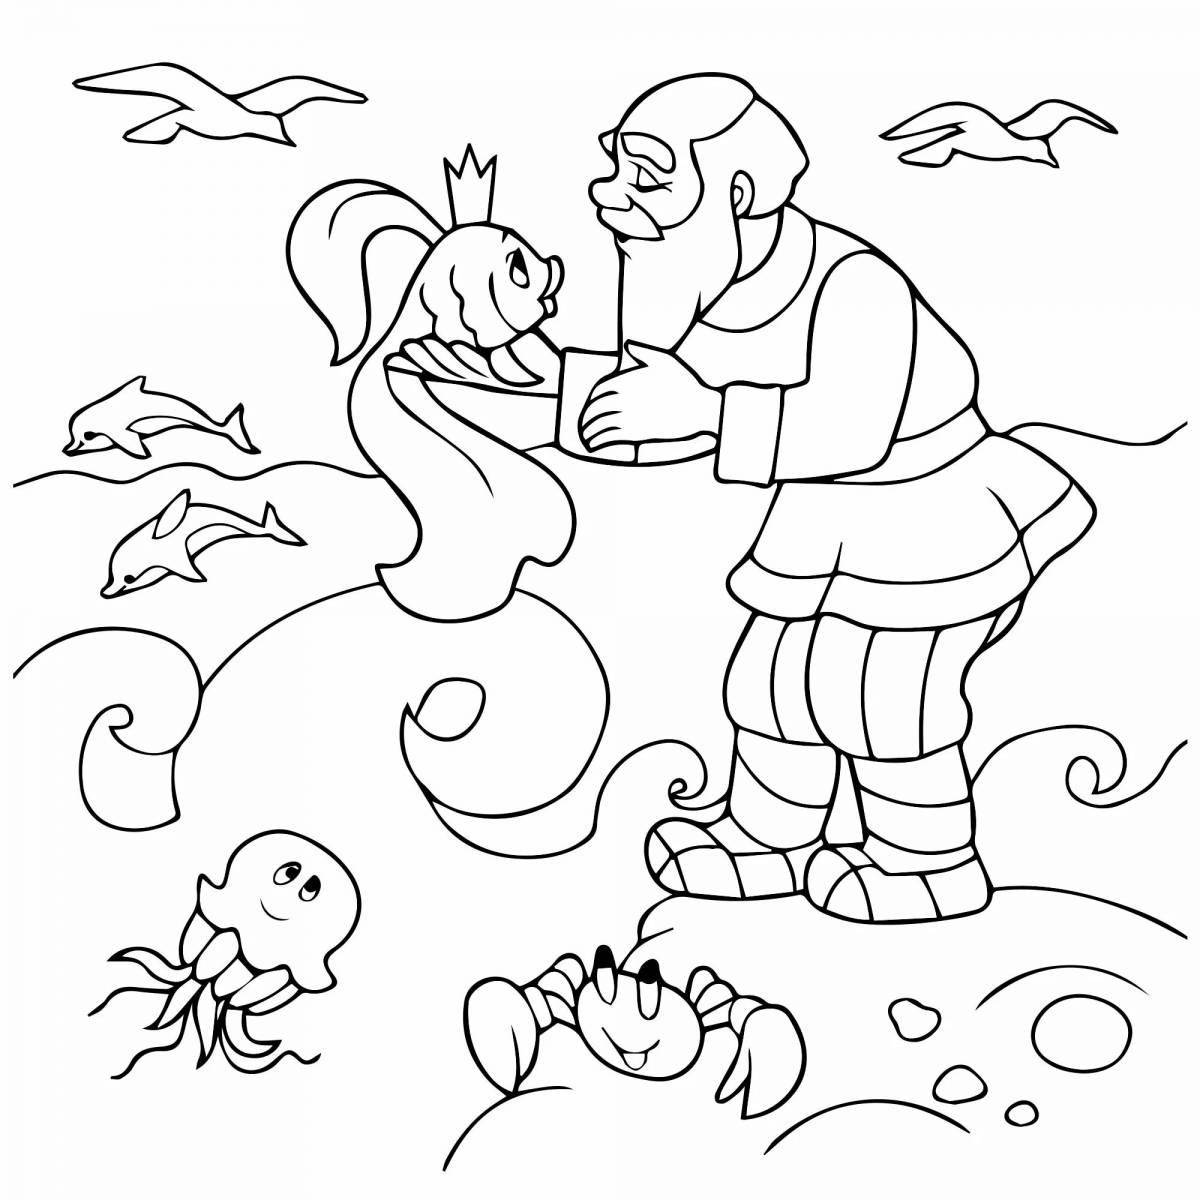 Inspirational coloring book based on Pushkin's fairy tales